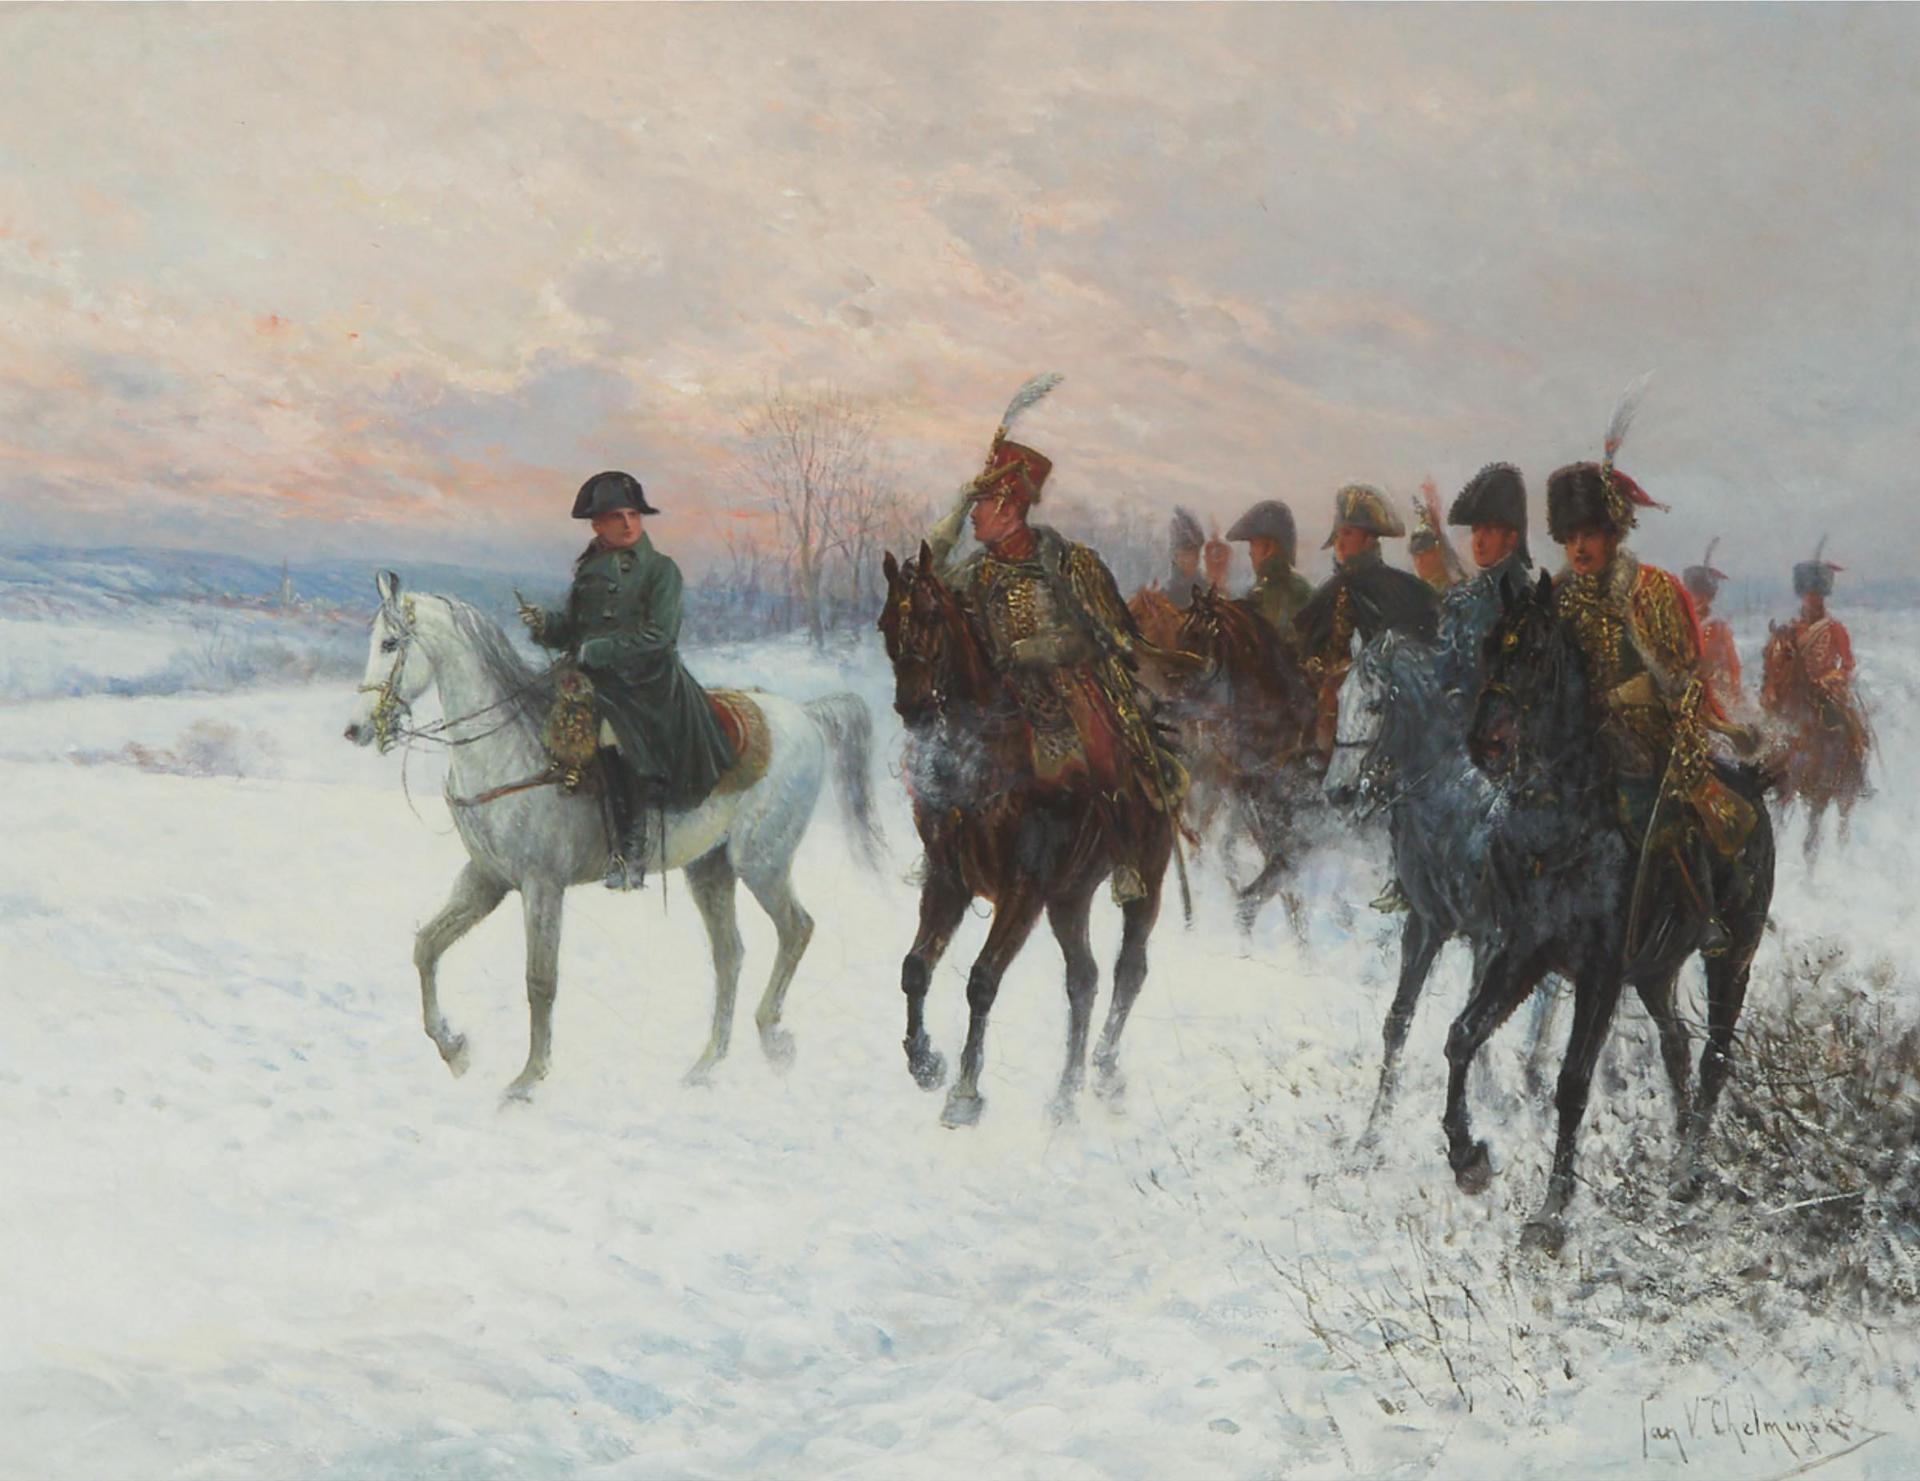 Jan van Chelminski (1851-1925) - Napoleon And Prince Poniatowski's Army During The Russian Campaign In 1812